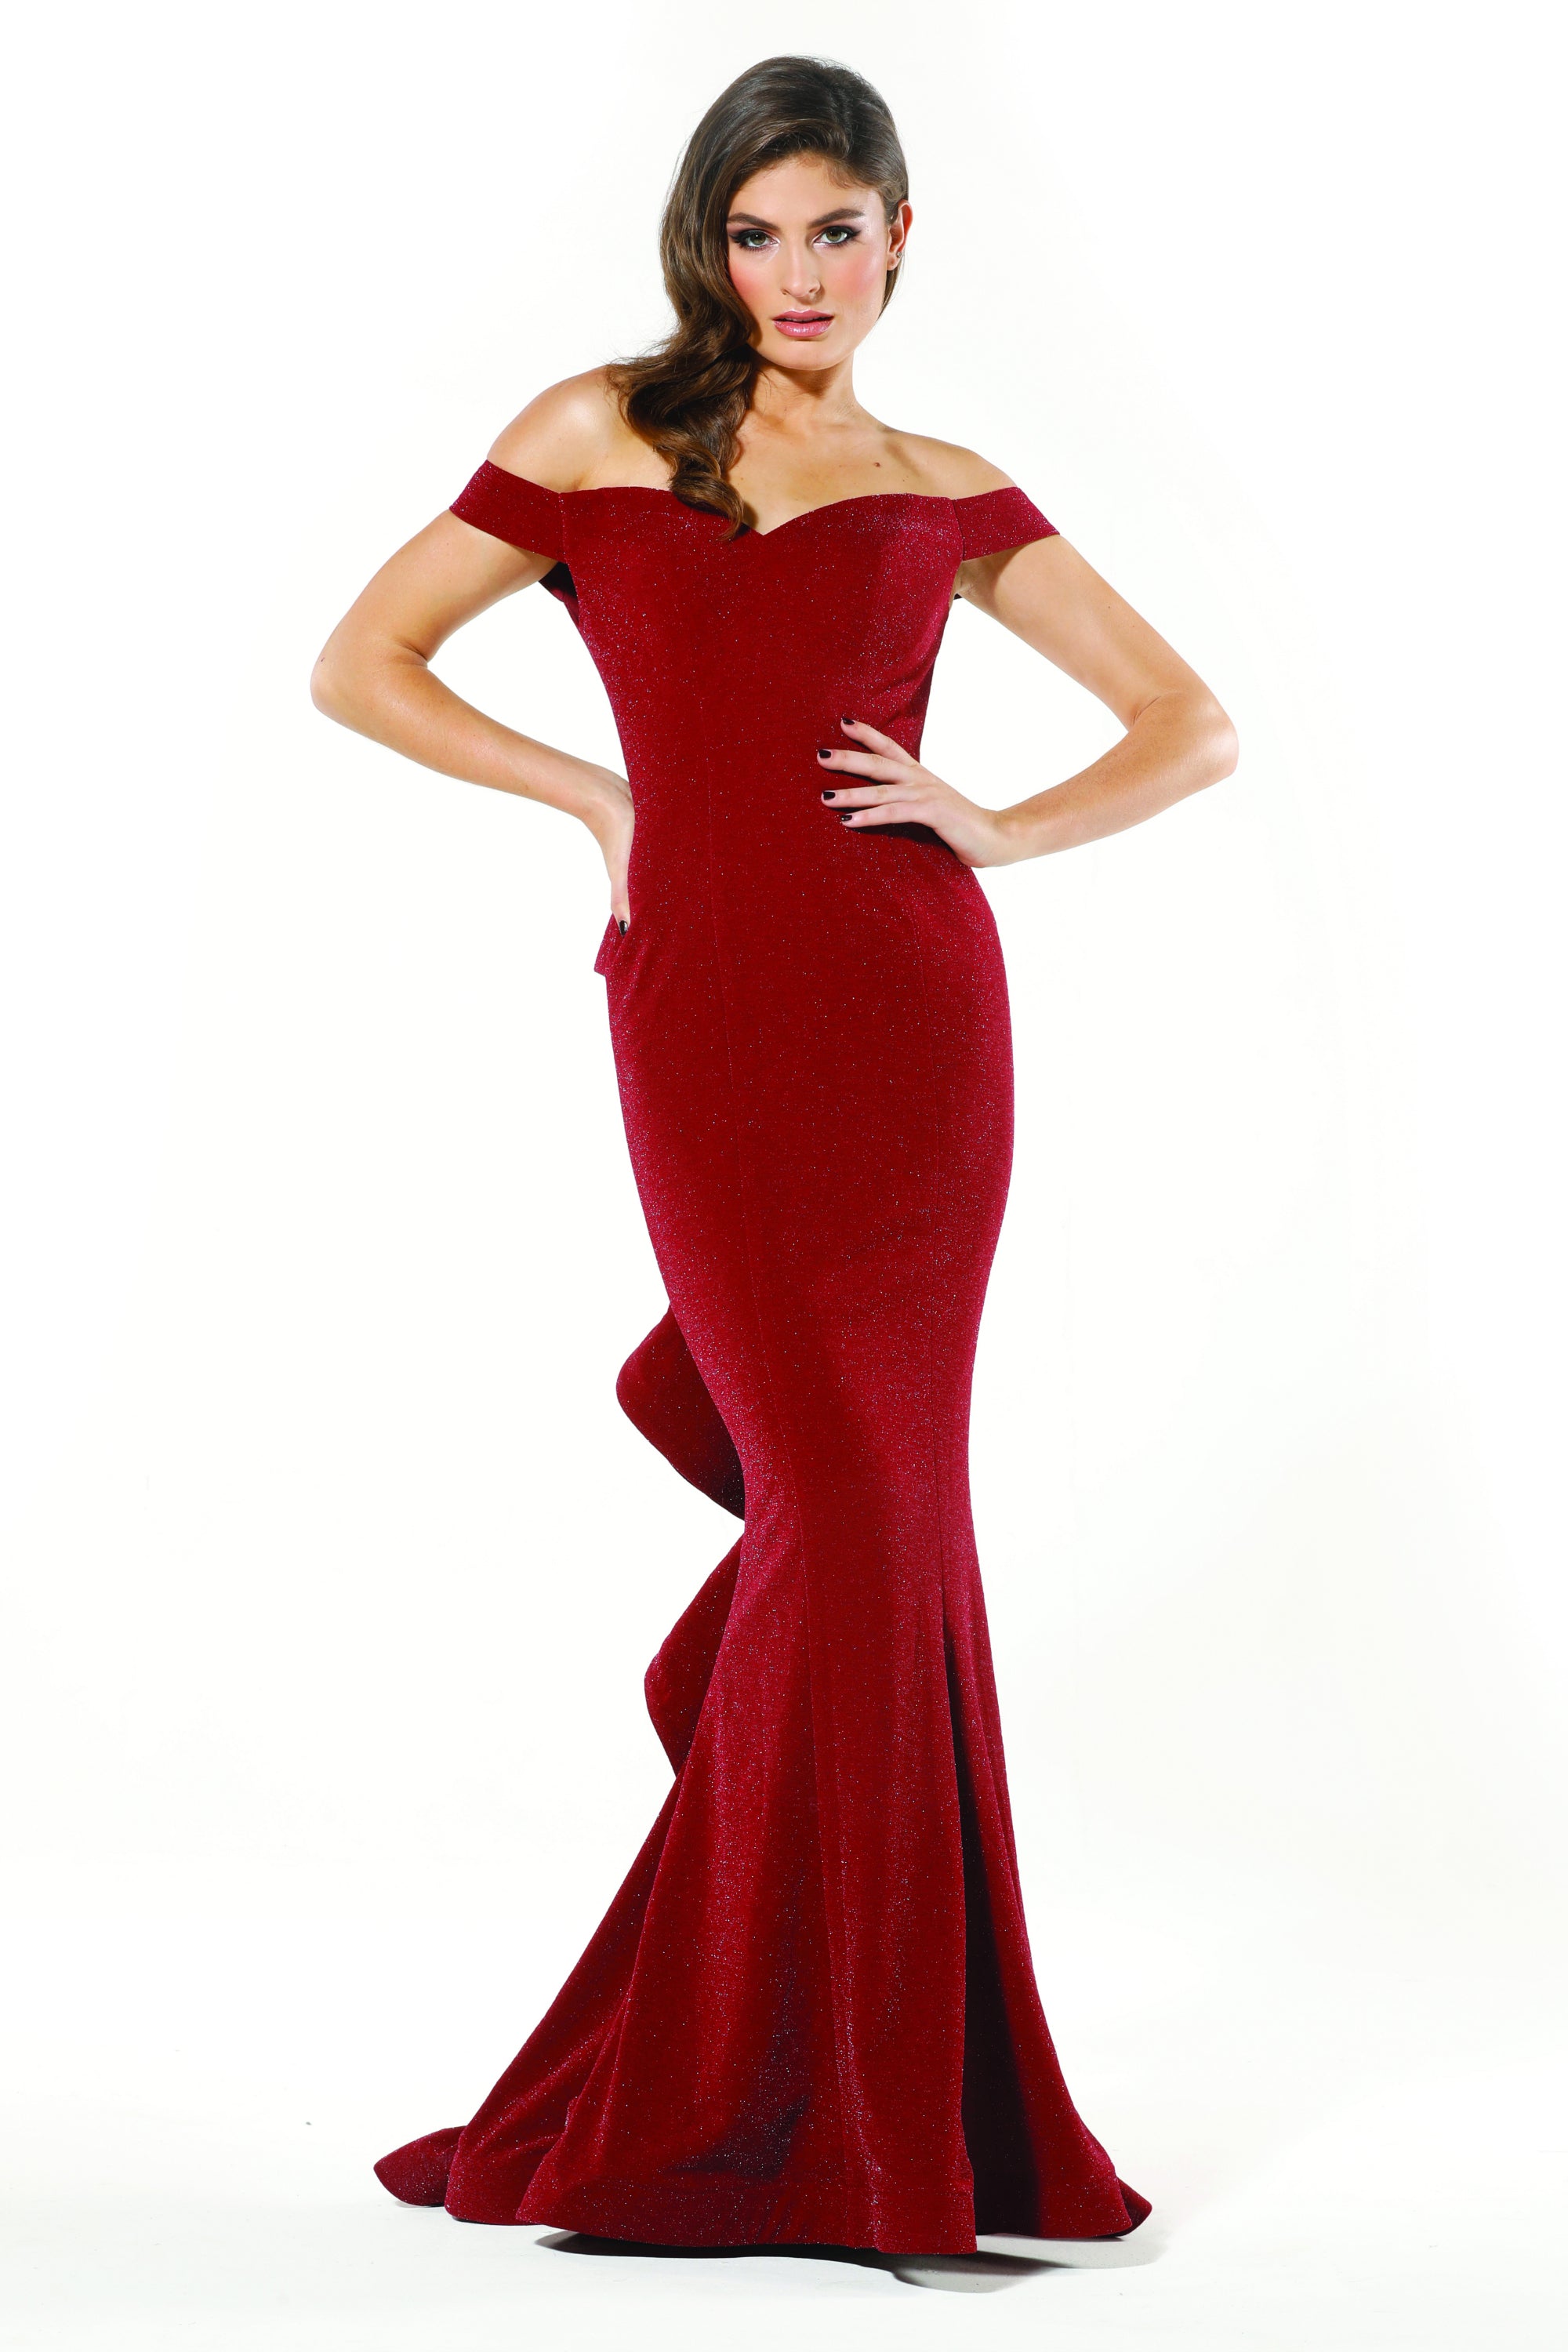 Tinaholy Couture T18117 Burgundy Jersey Off Shoulder Formal Gown Tina Holly Couture$ AfterPay Humm ZipPay LayBuy Sezzle